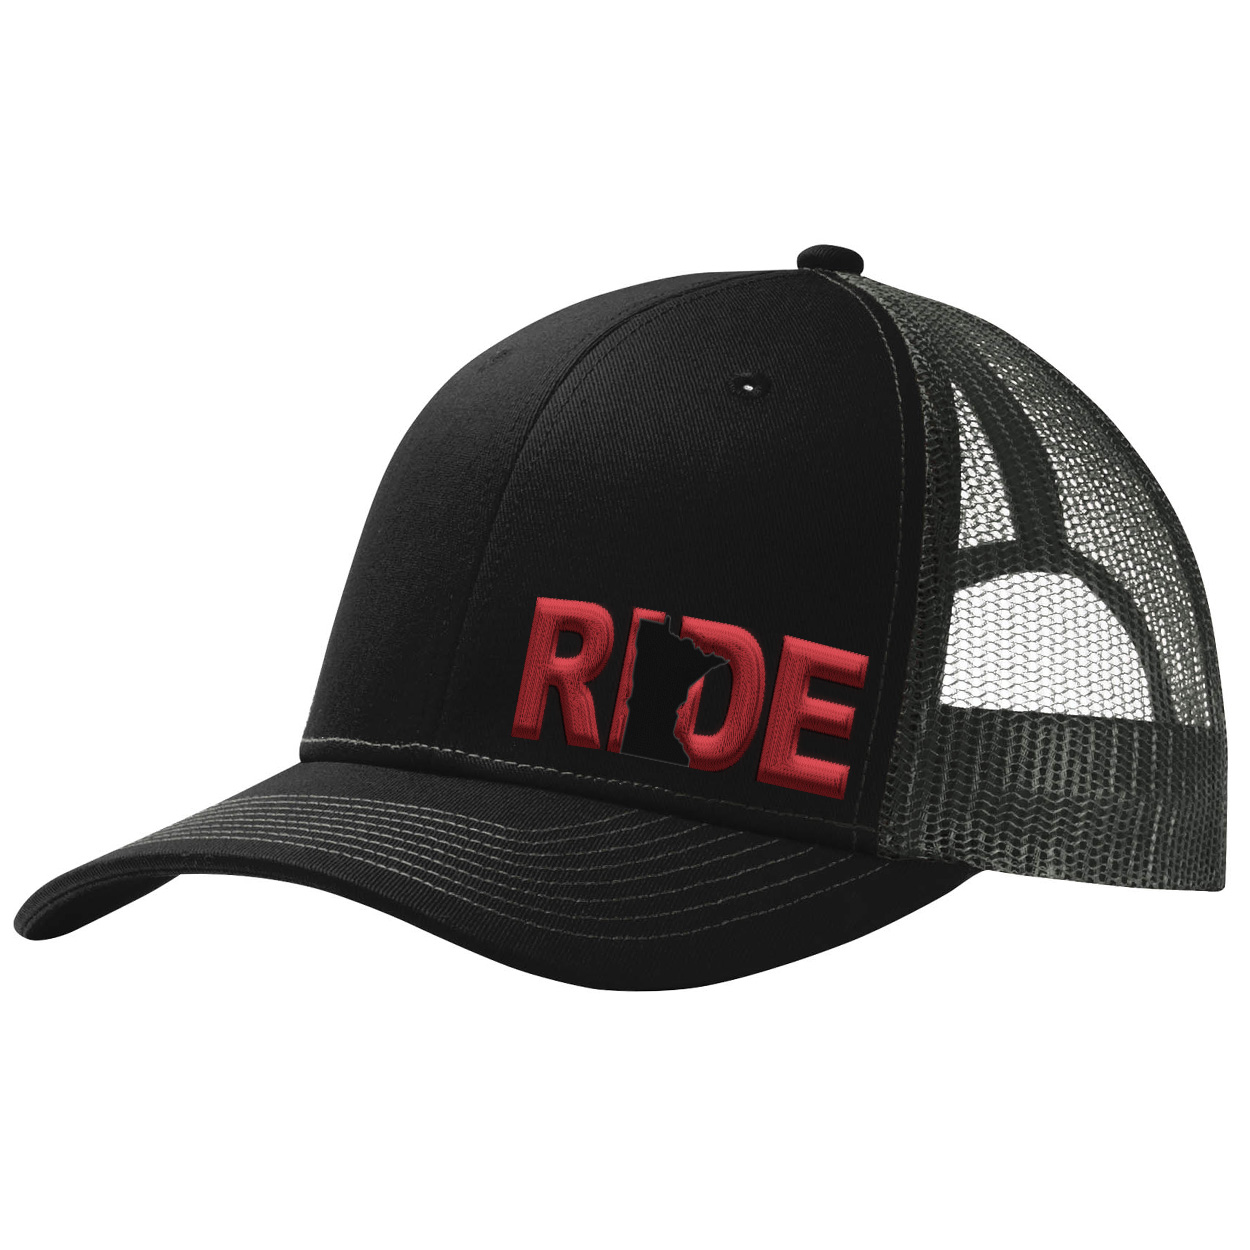 Ride Minnesota Night Out Pro Embroidered Snapback Trucker Hat Black/Red